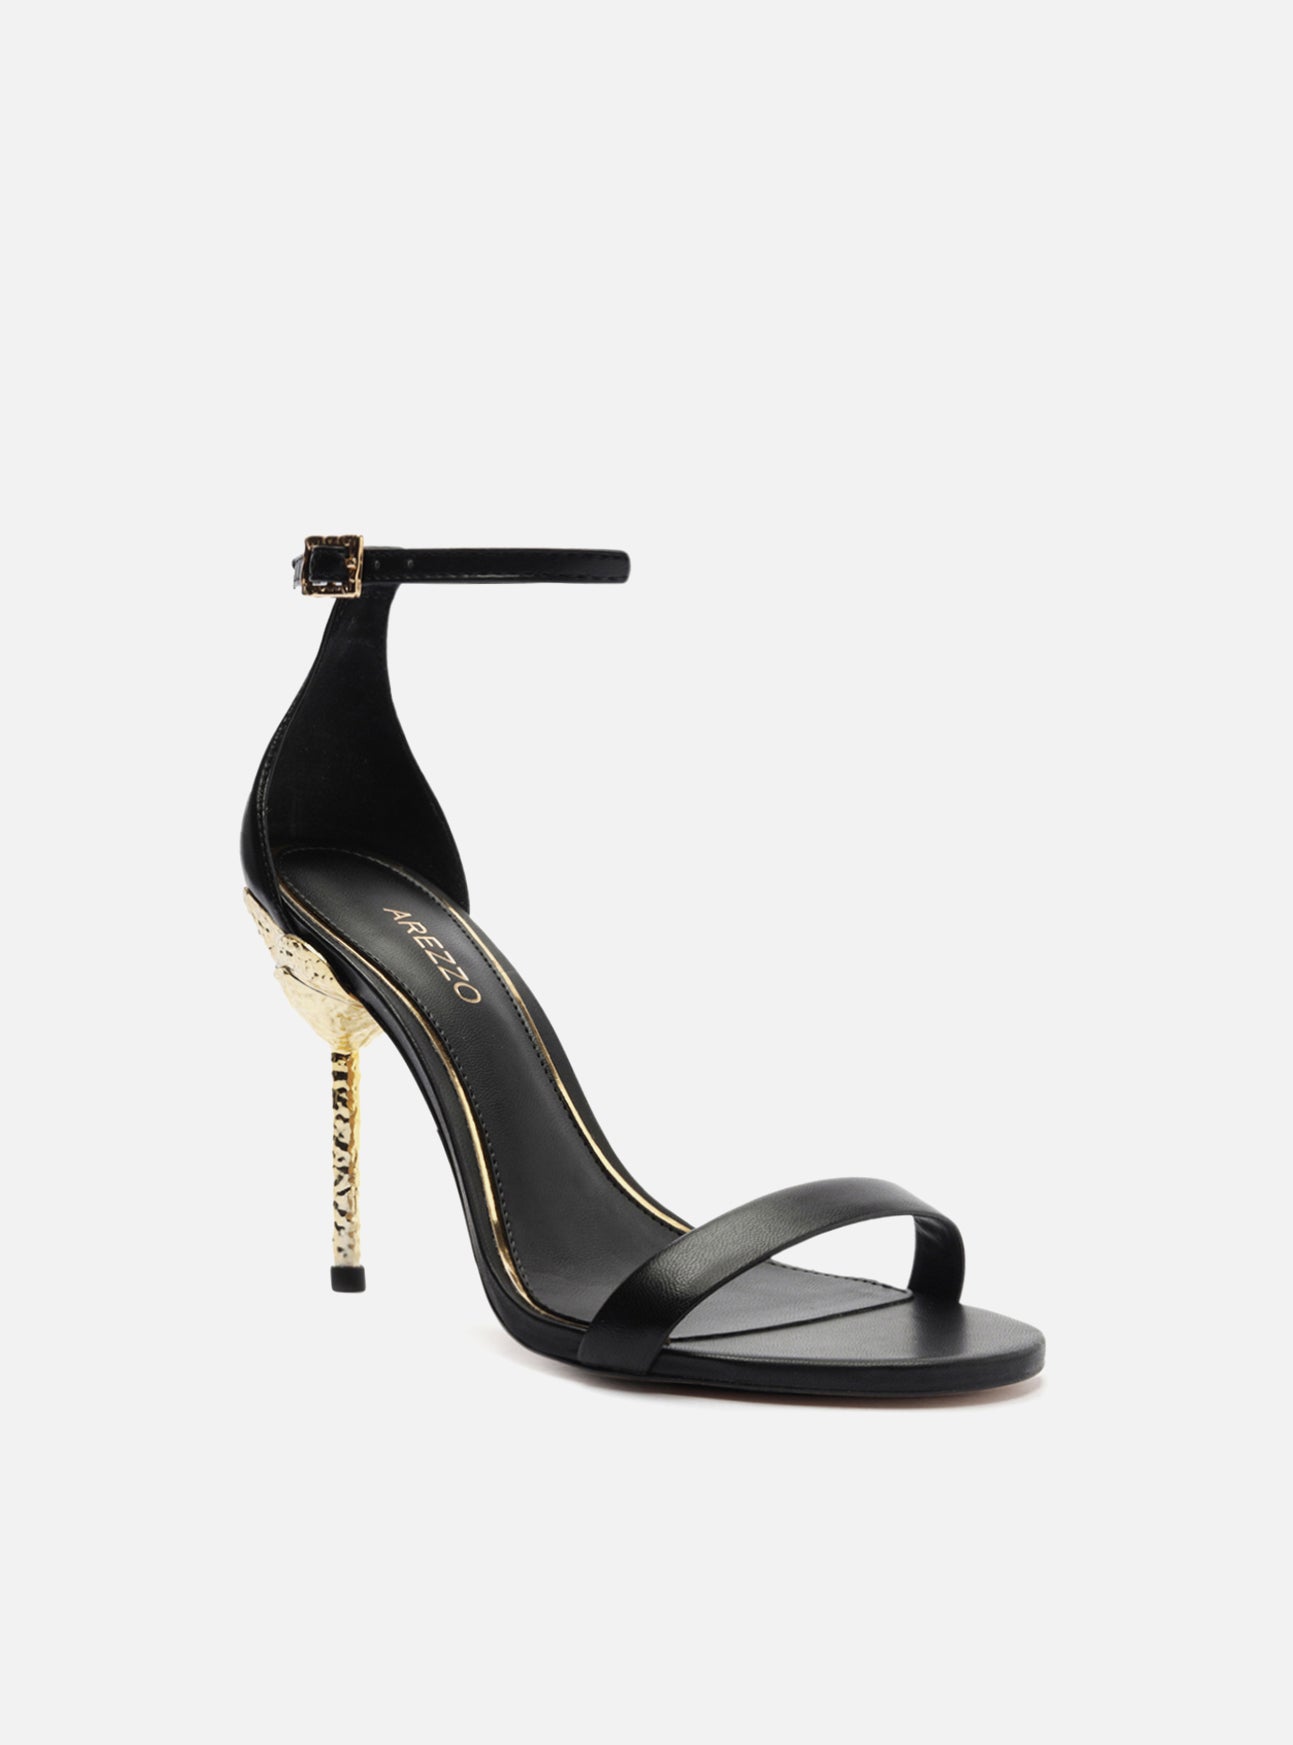 The Campaign Leather Sandal